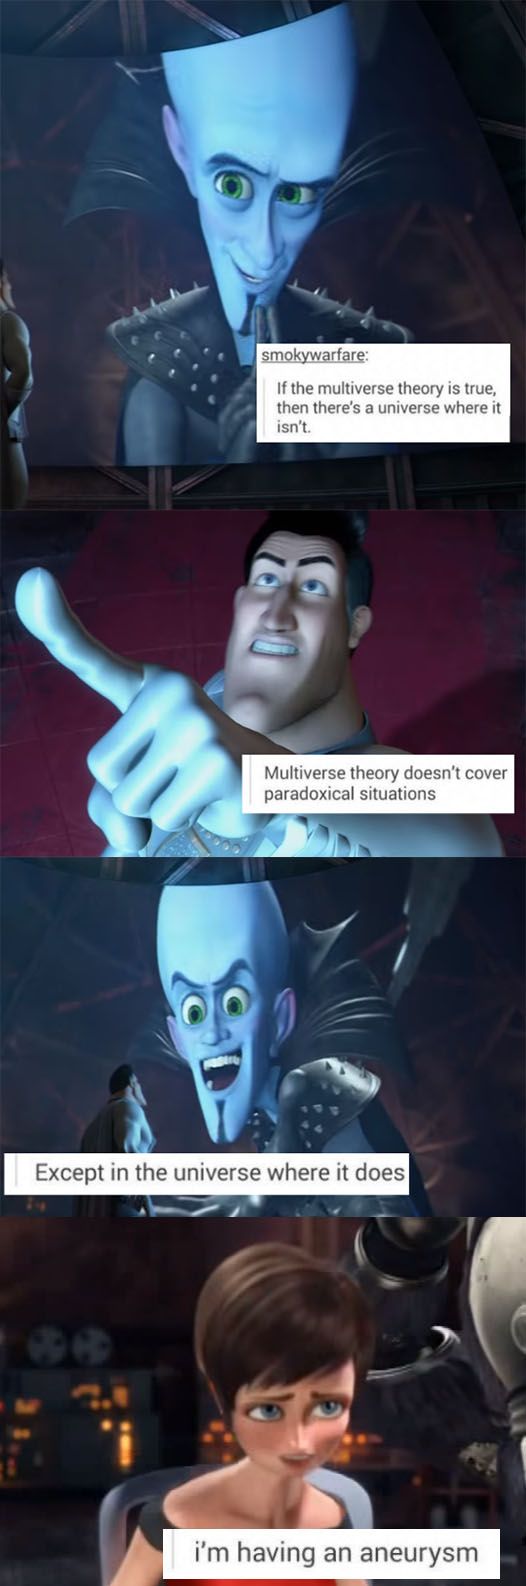 multiverse theory supports a universe where loss memes don't exist